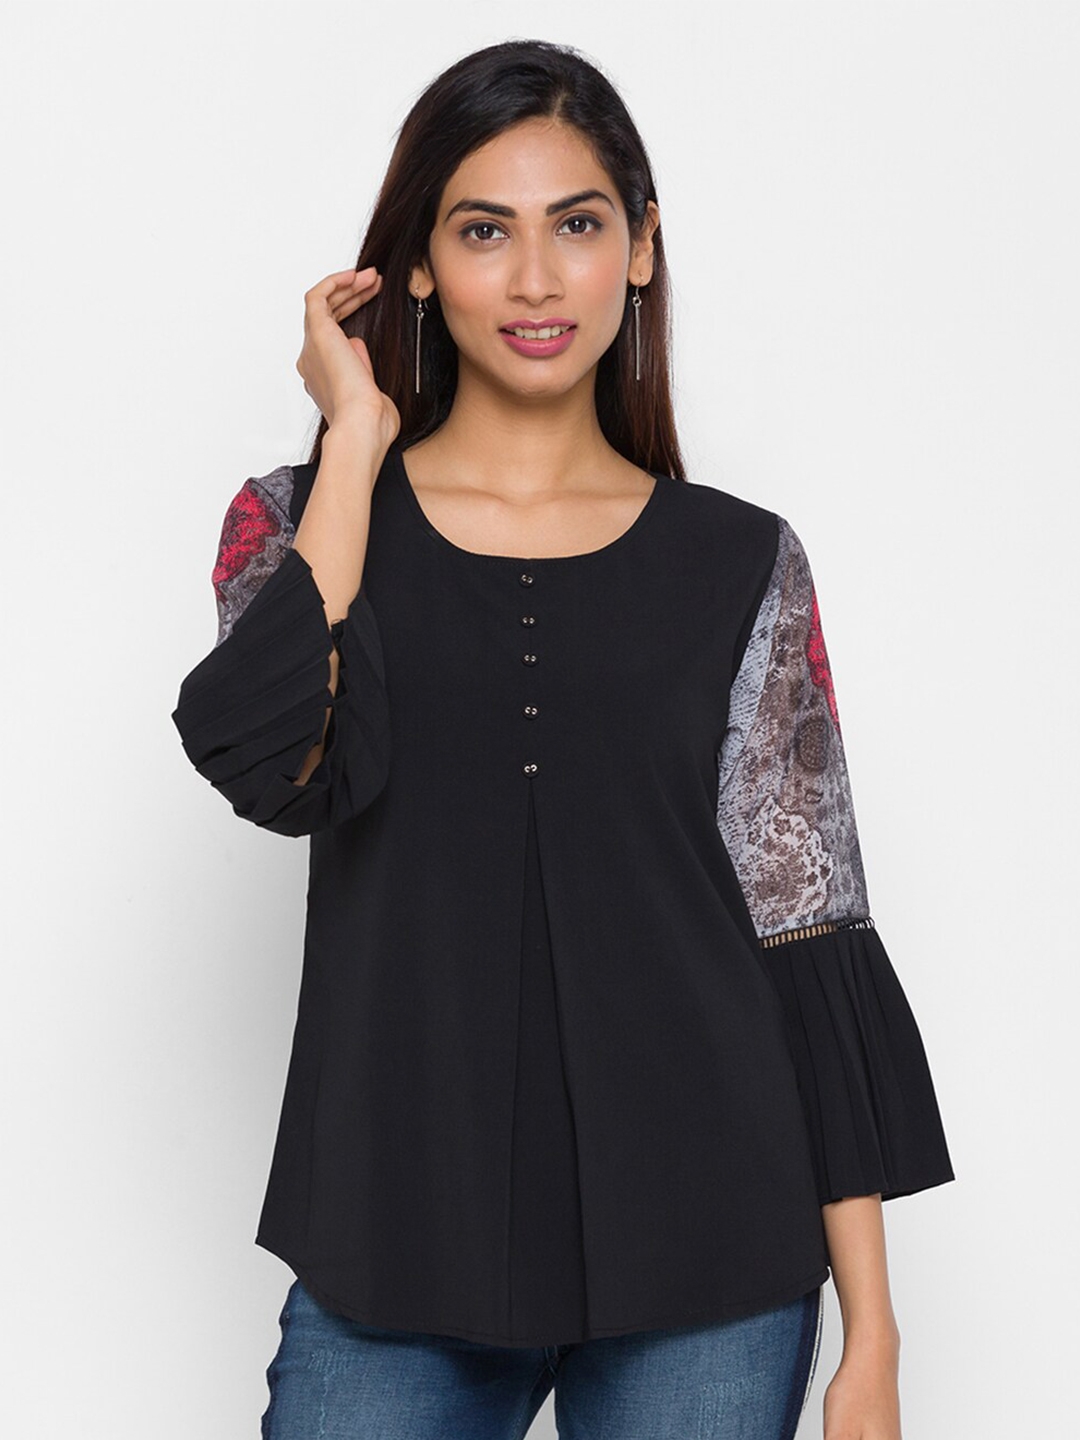 ZOLA Black Solid Chiffon Bell Sleeves A Line Casual Top